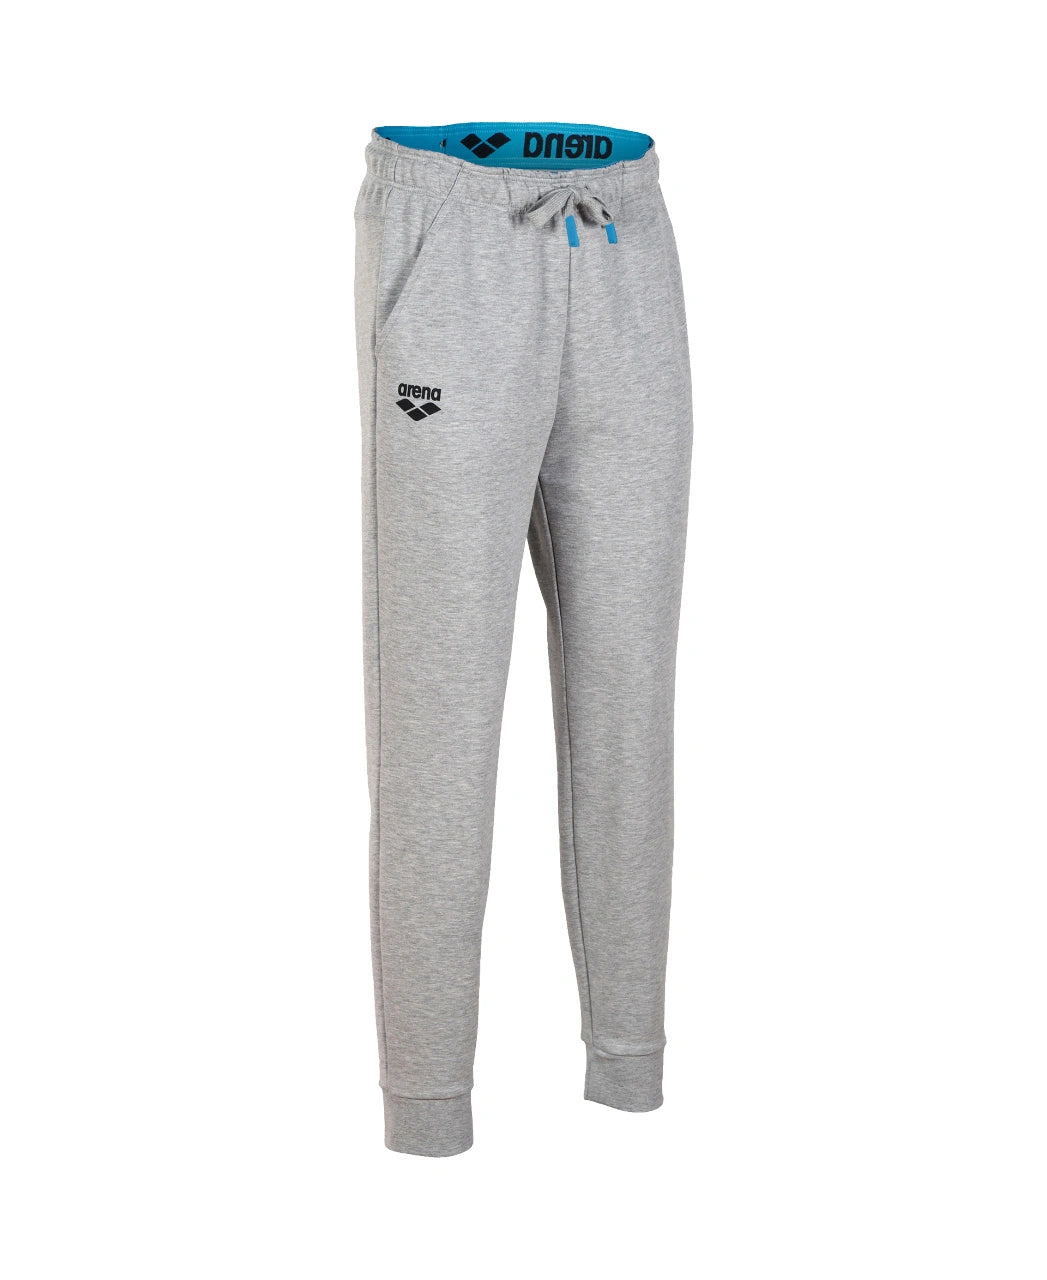 WOMEN’S TEAM PANT SOLID